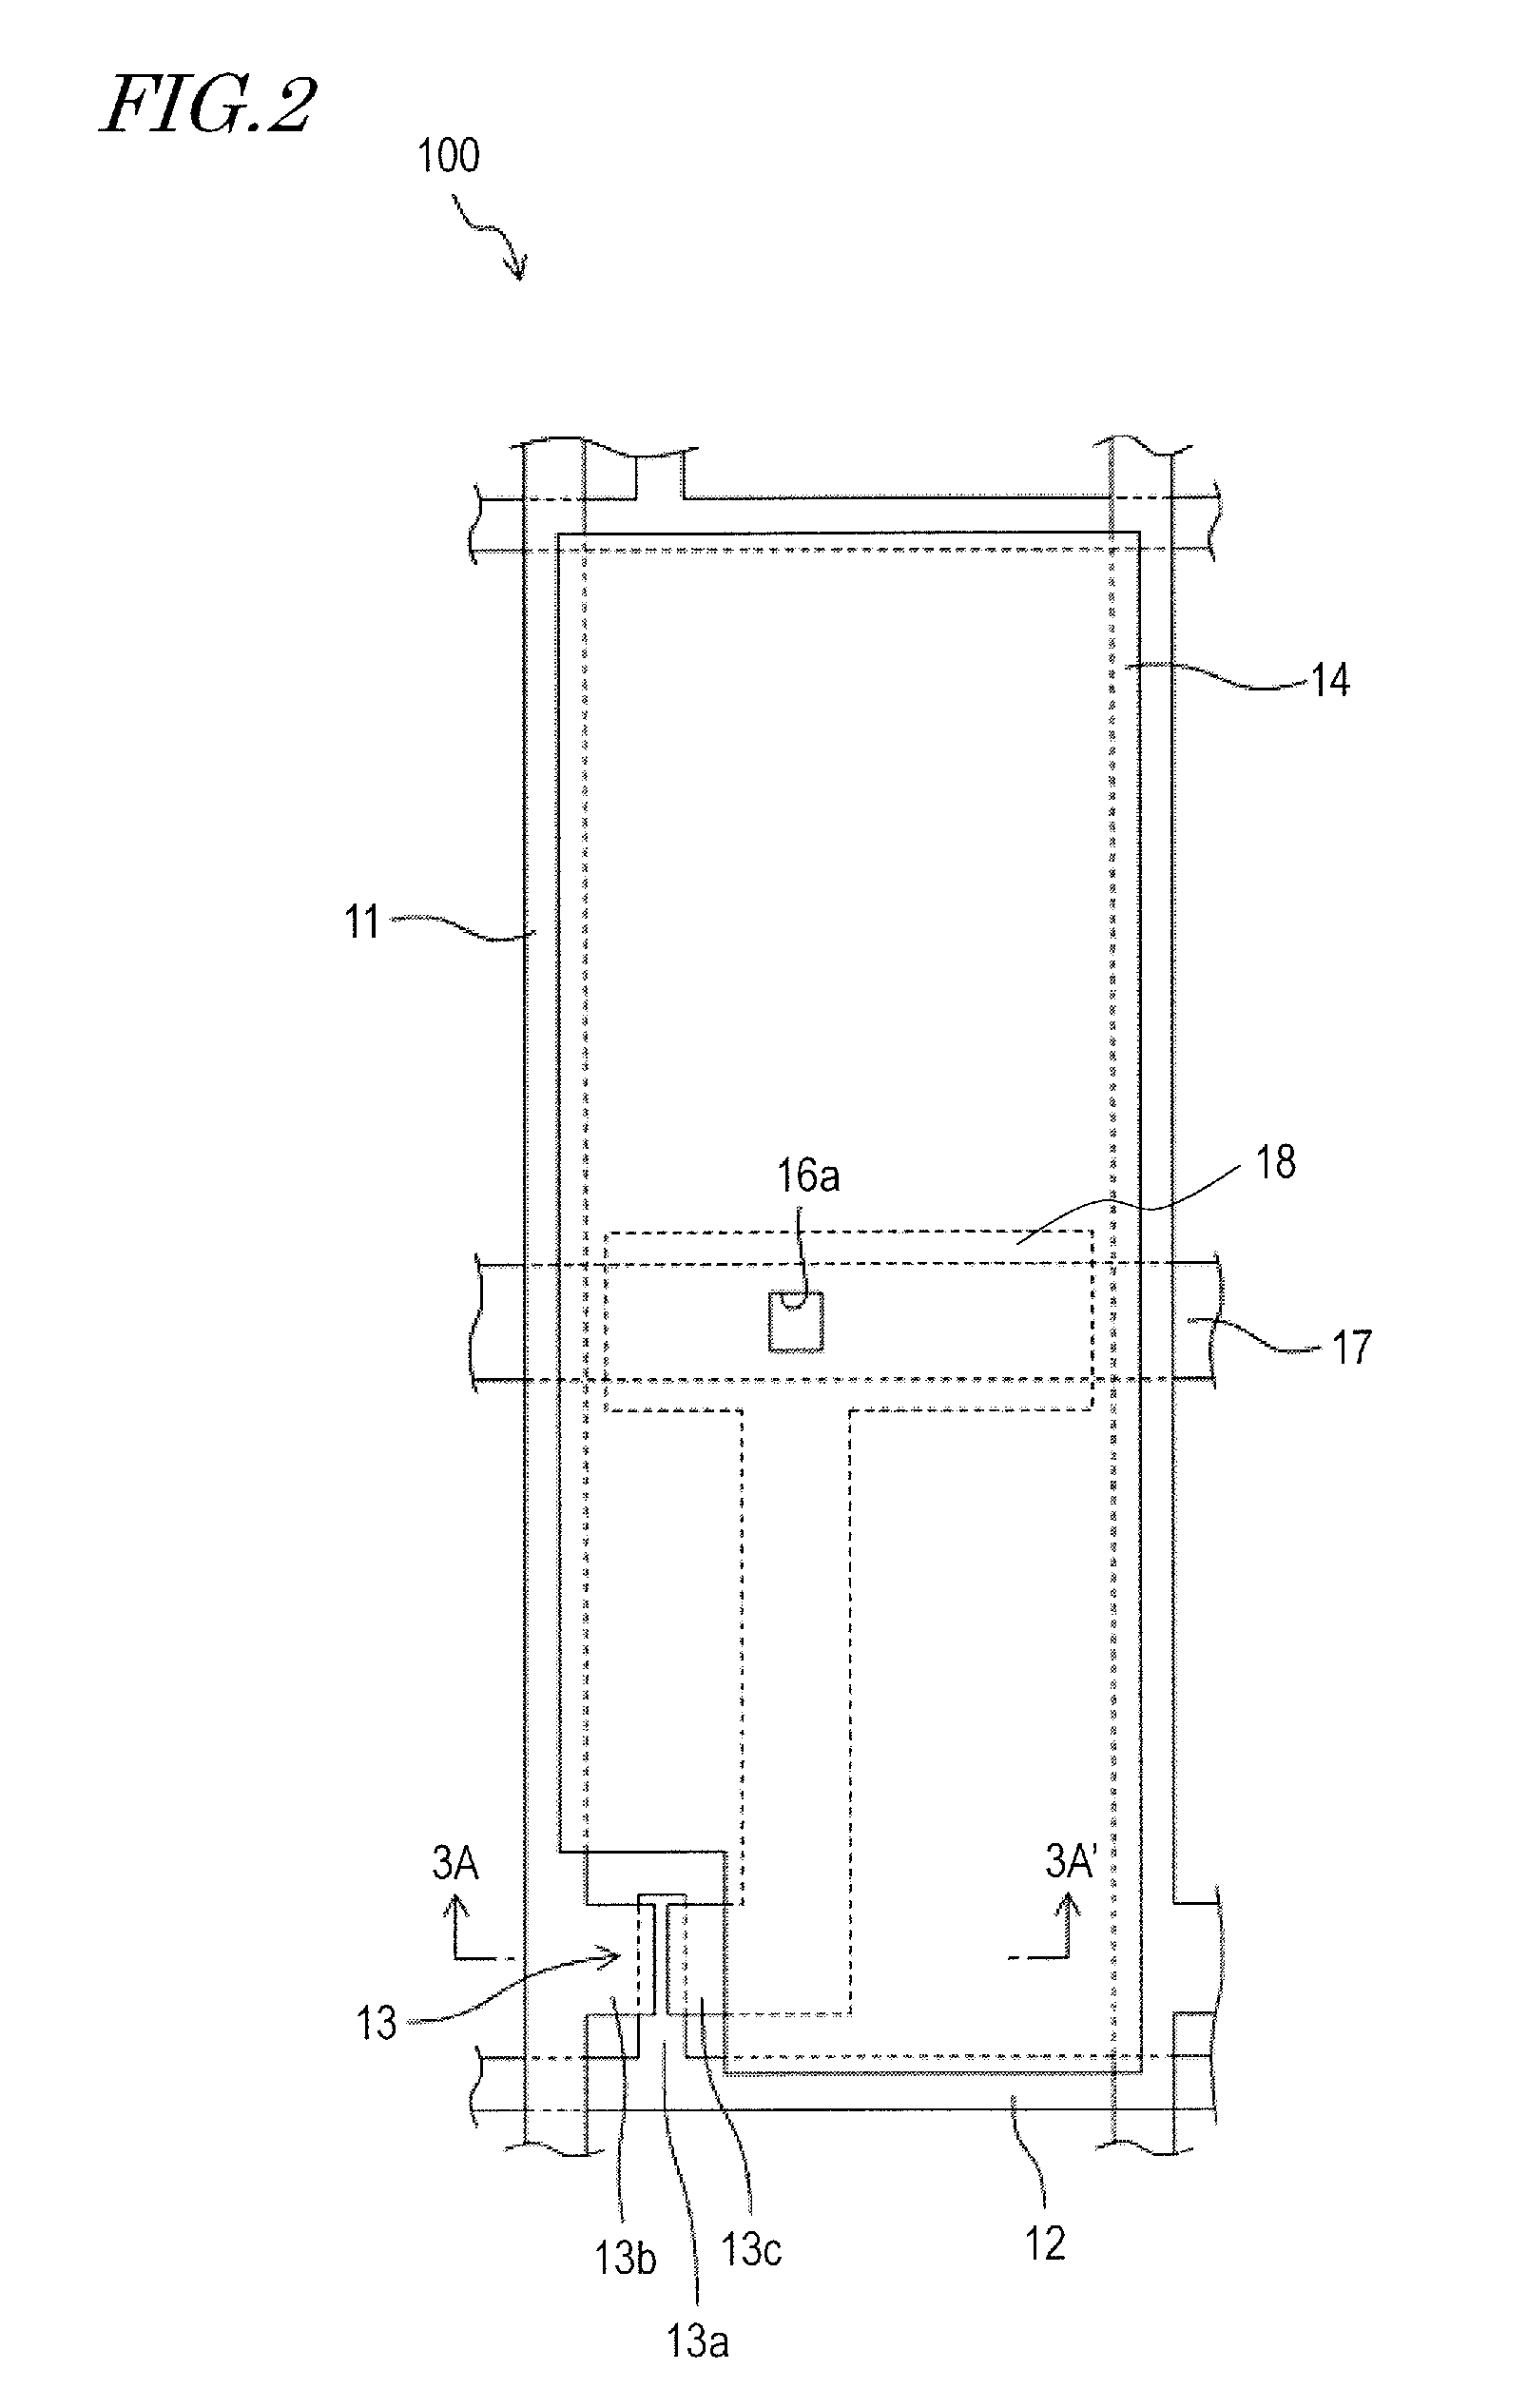 Active matrix substrate, display device, defect modification method for display device, and method for manufacturing display device